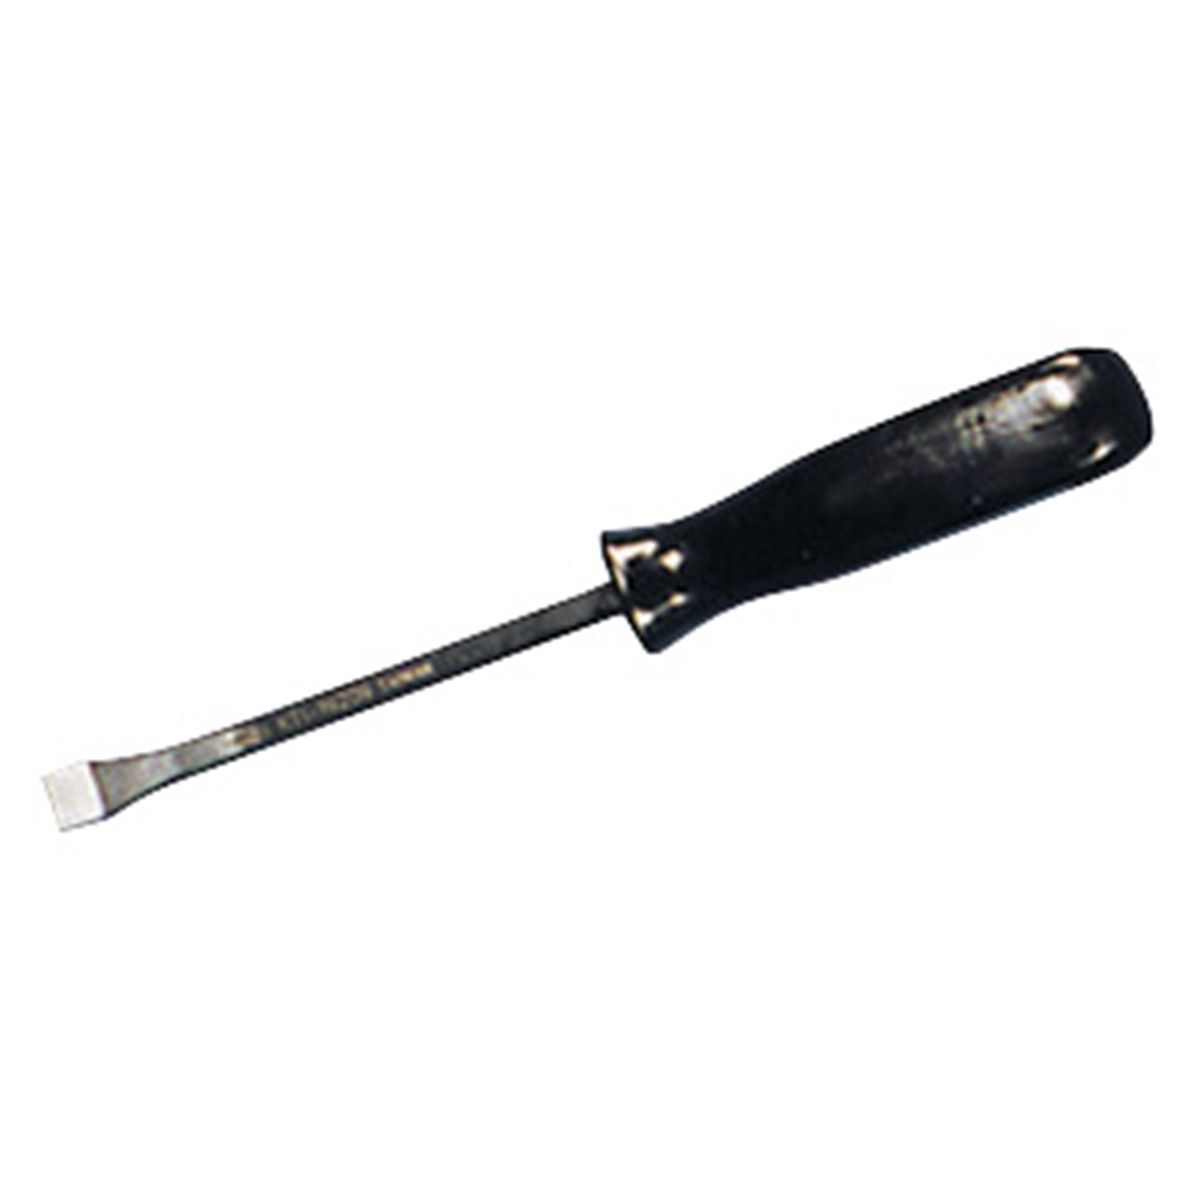 Pry Bar w/ Square Handle - 9 In